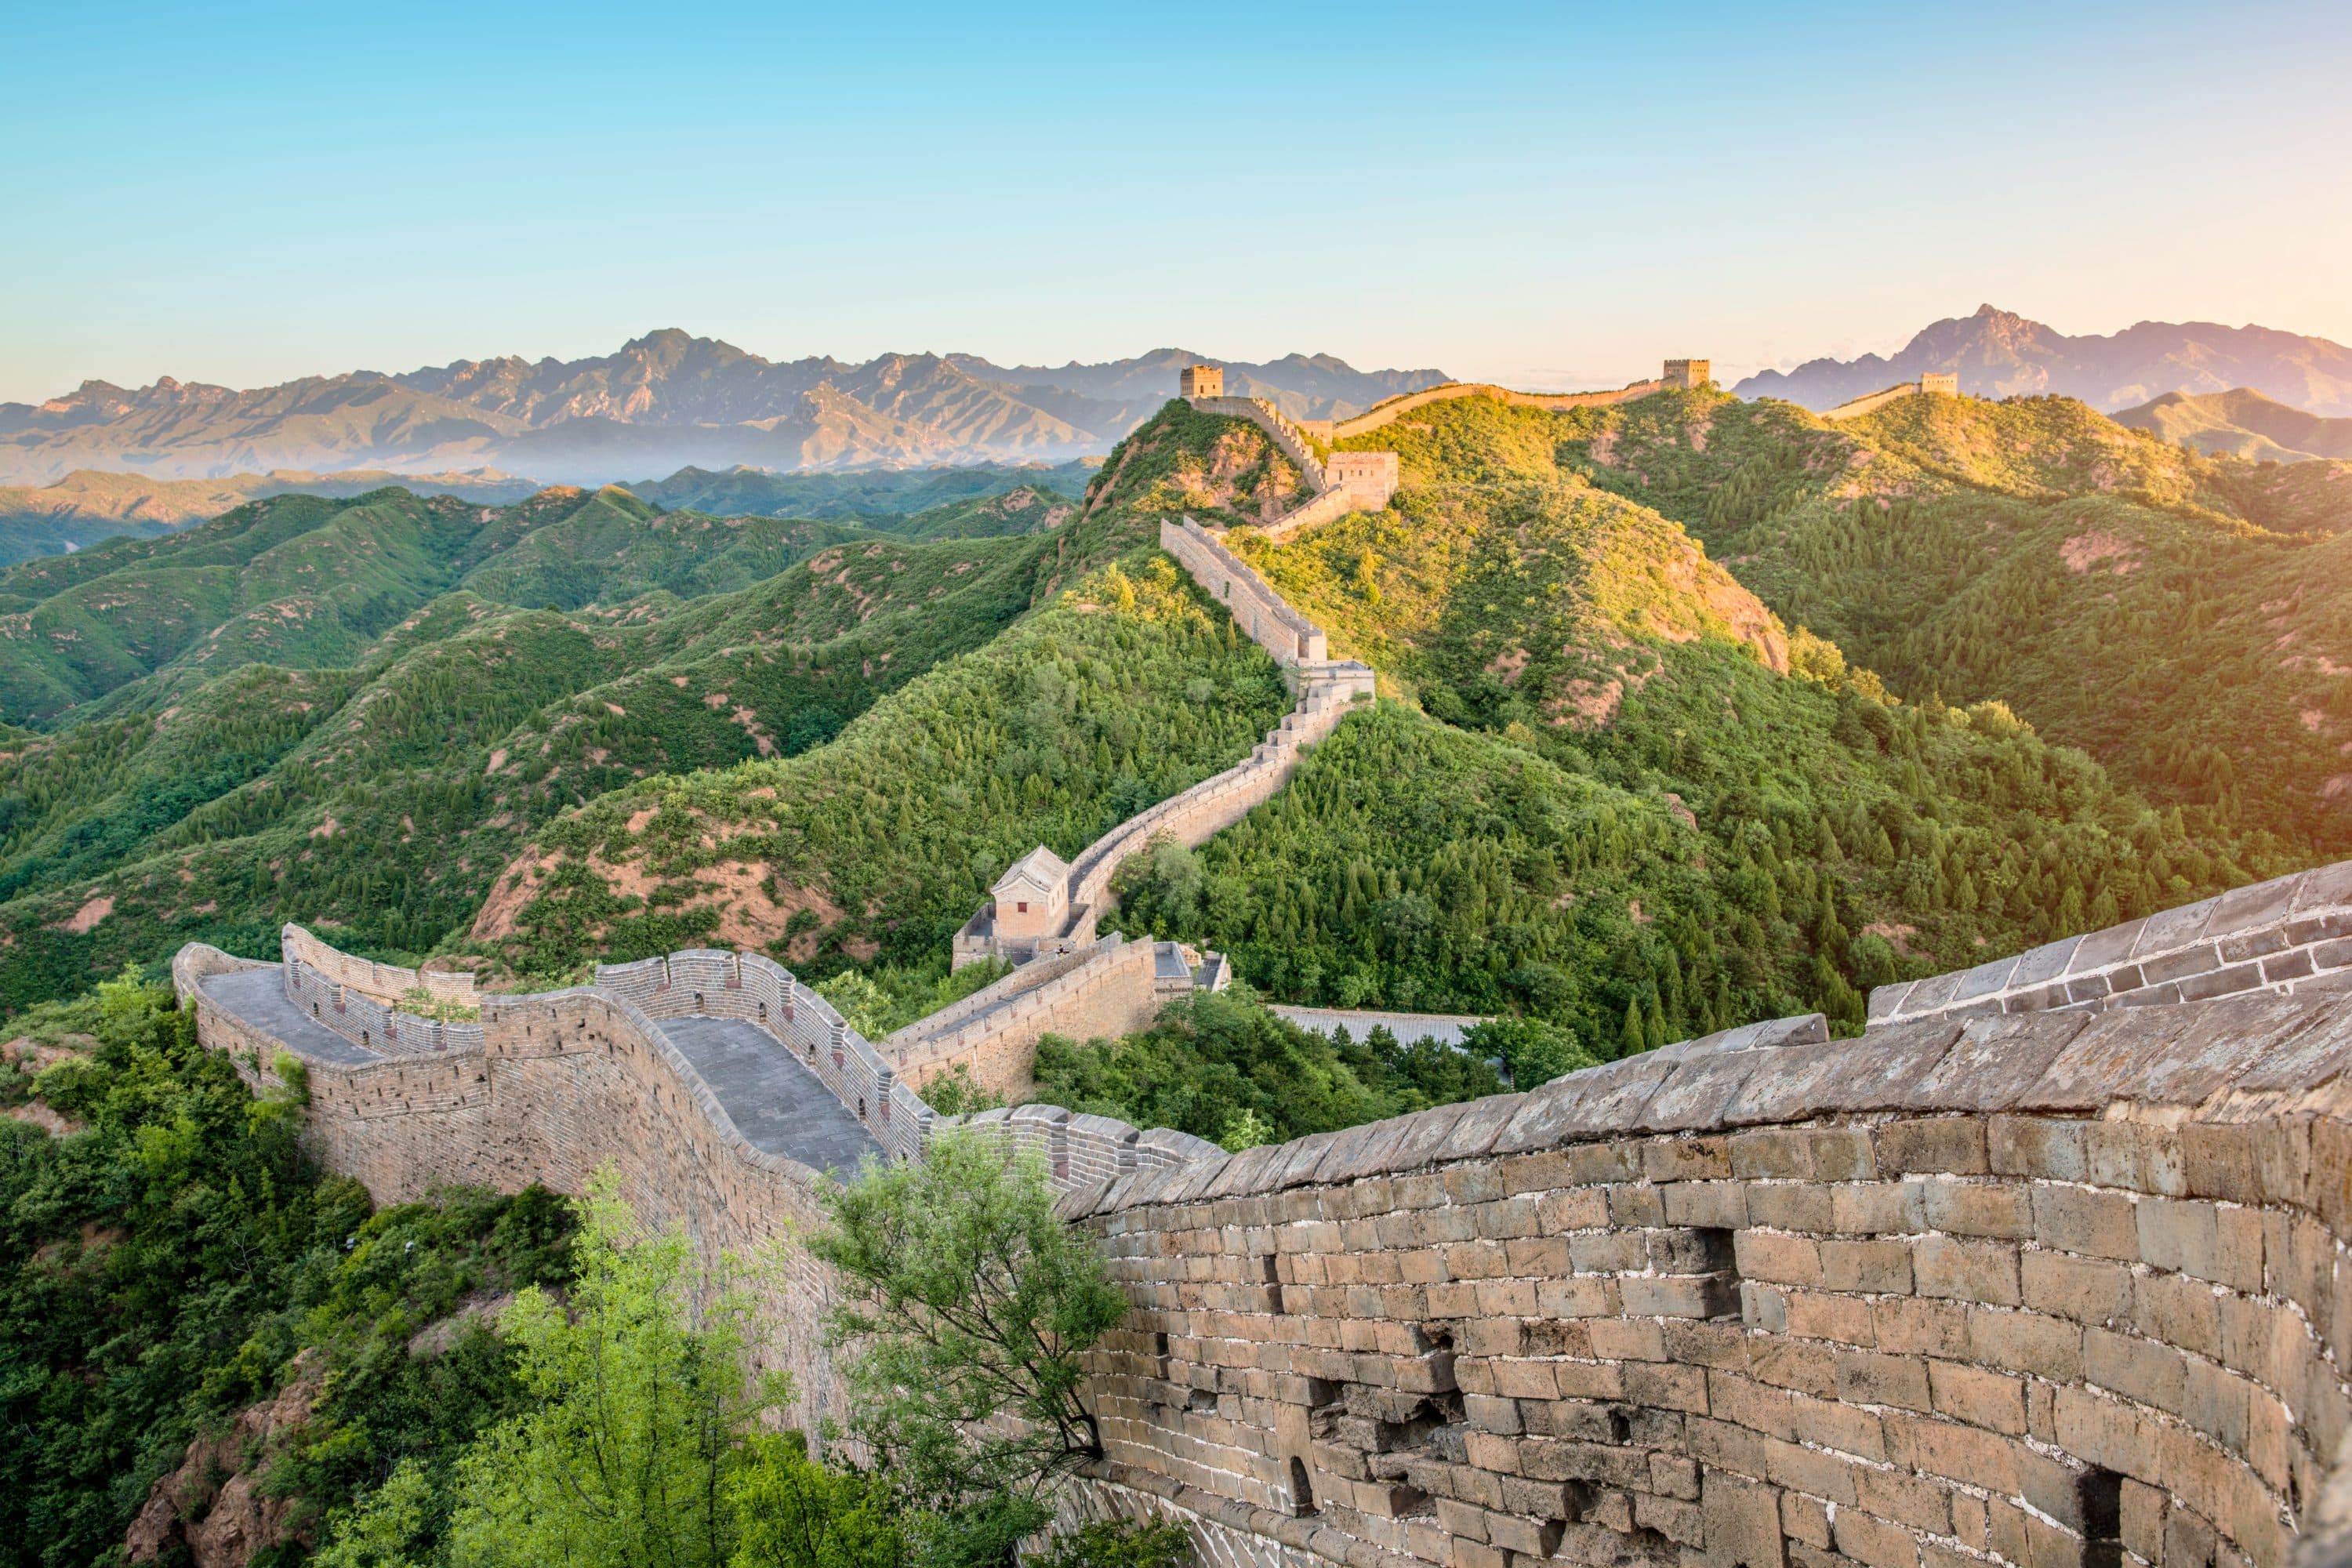 View over the Great Wall of China